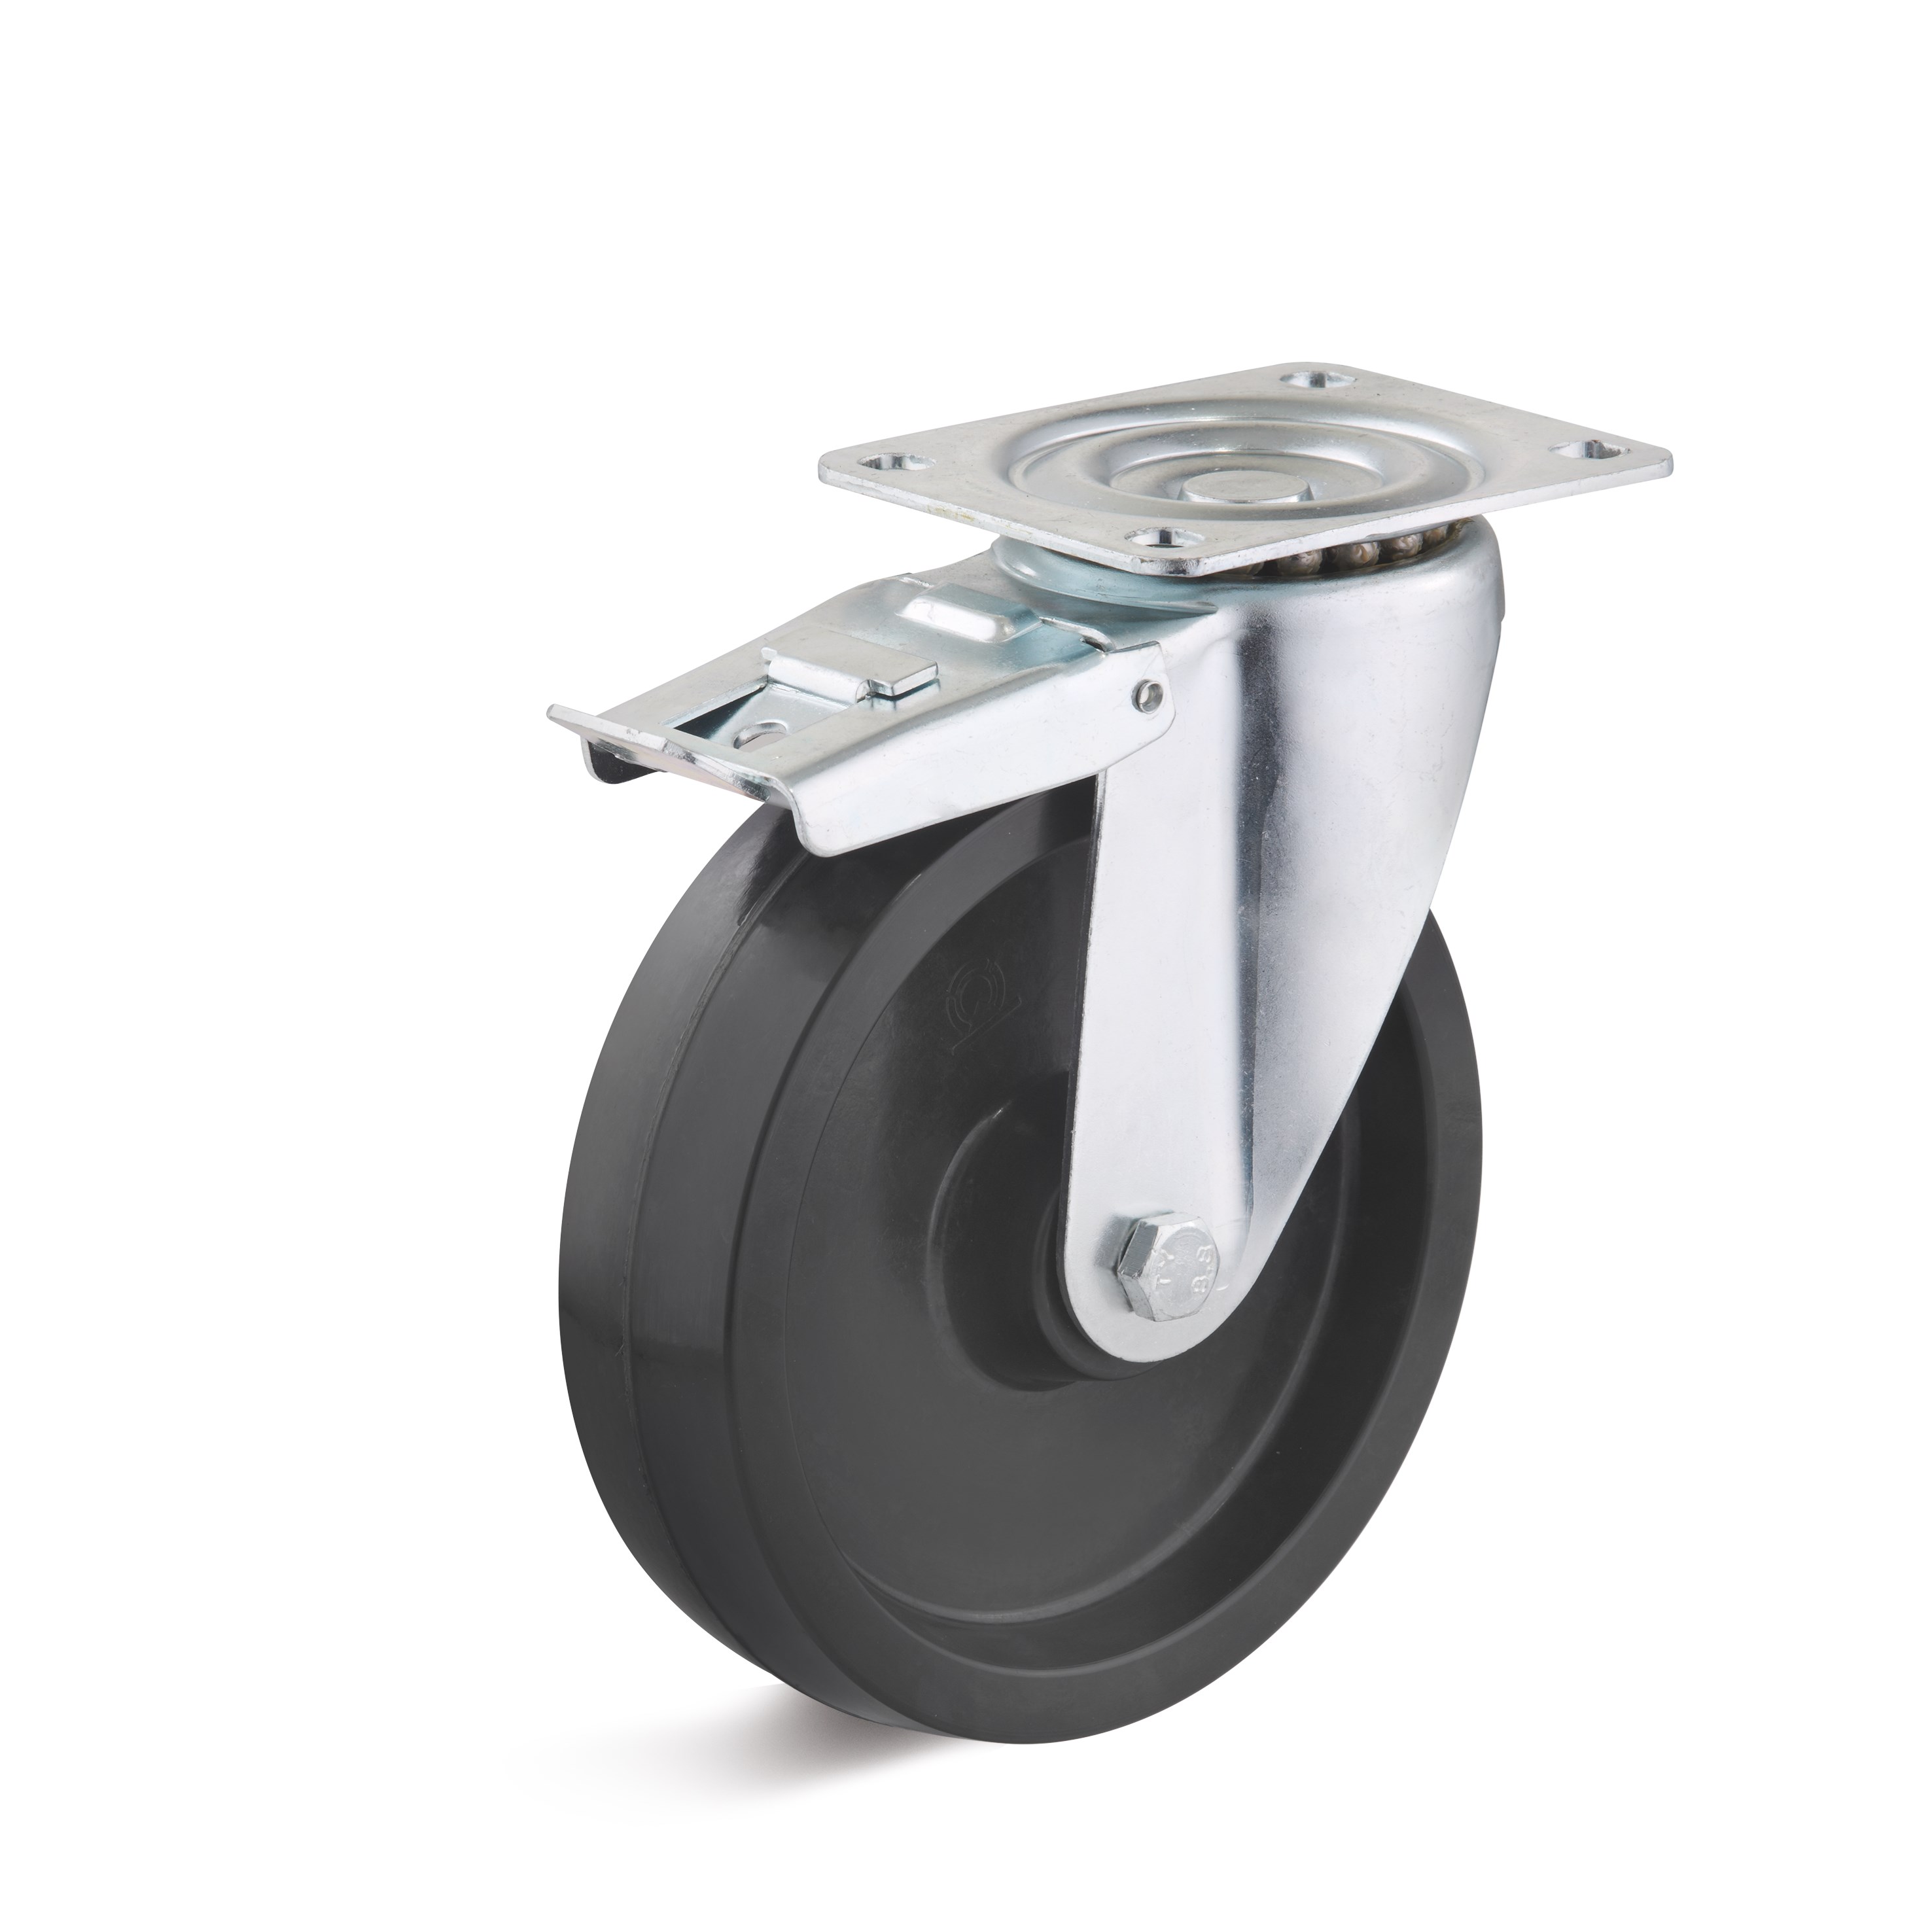 Swivel caster with double stop and heat resistant wheel